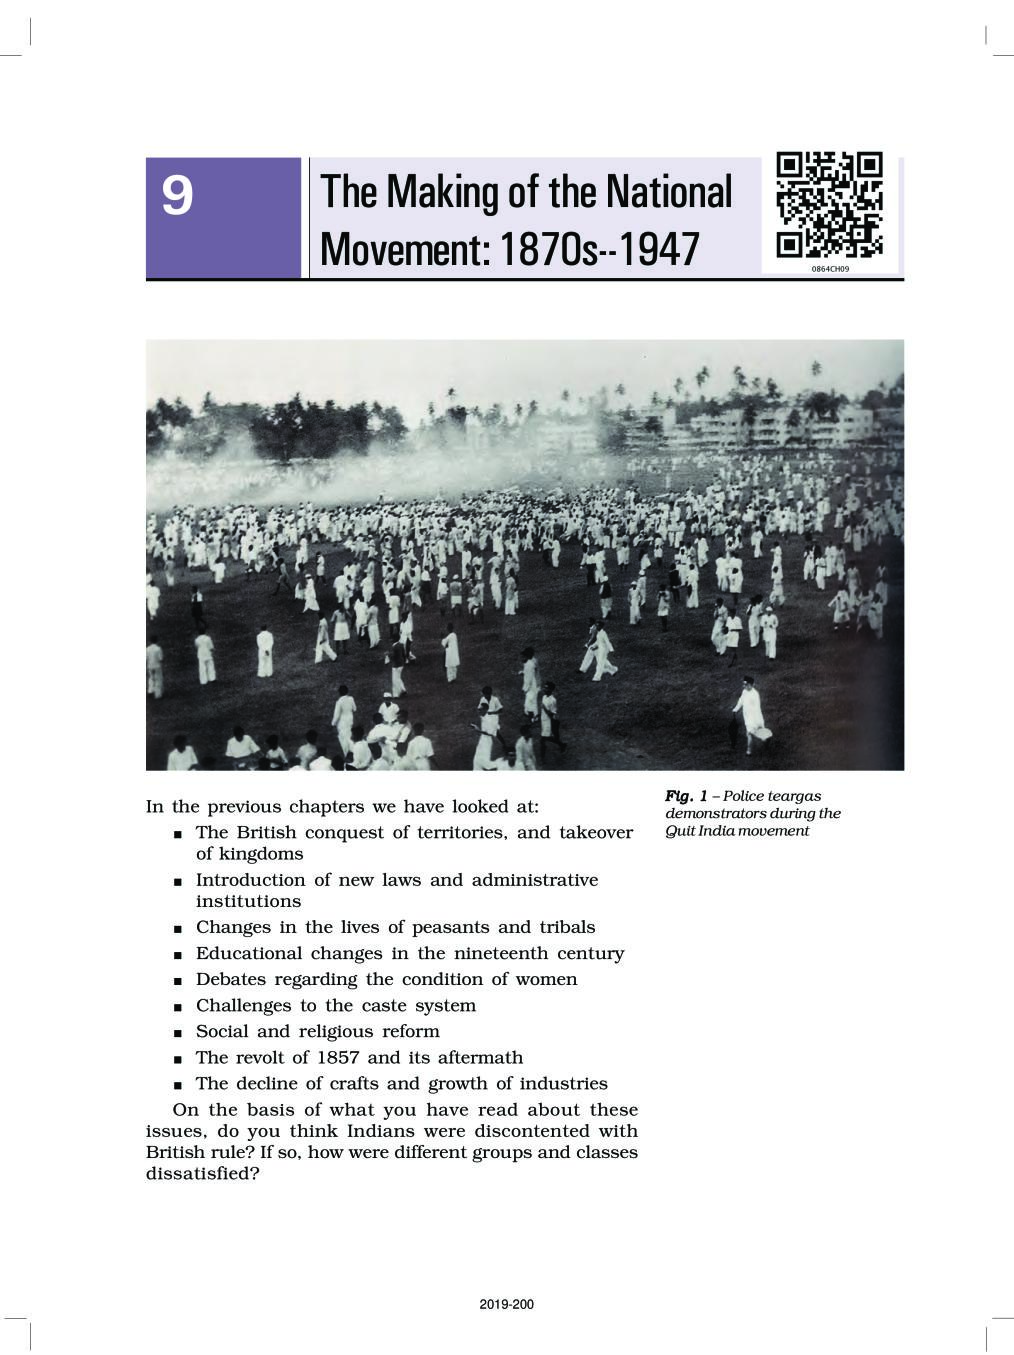 NCERT Book Class 8 Social Science (History) Chapter 9 The Making of the National Movement: 1870s-1947 - Page 1